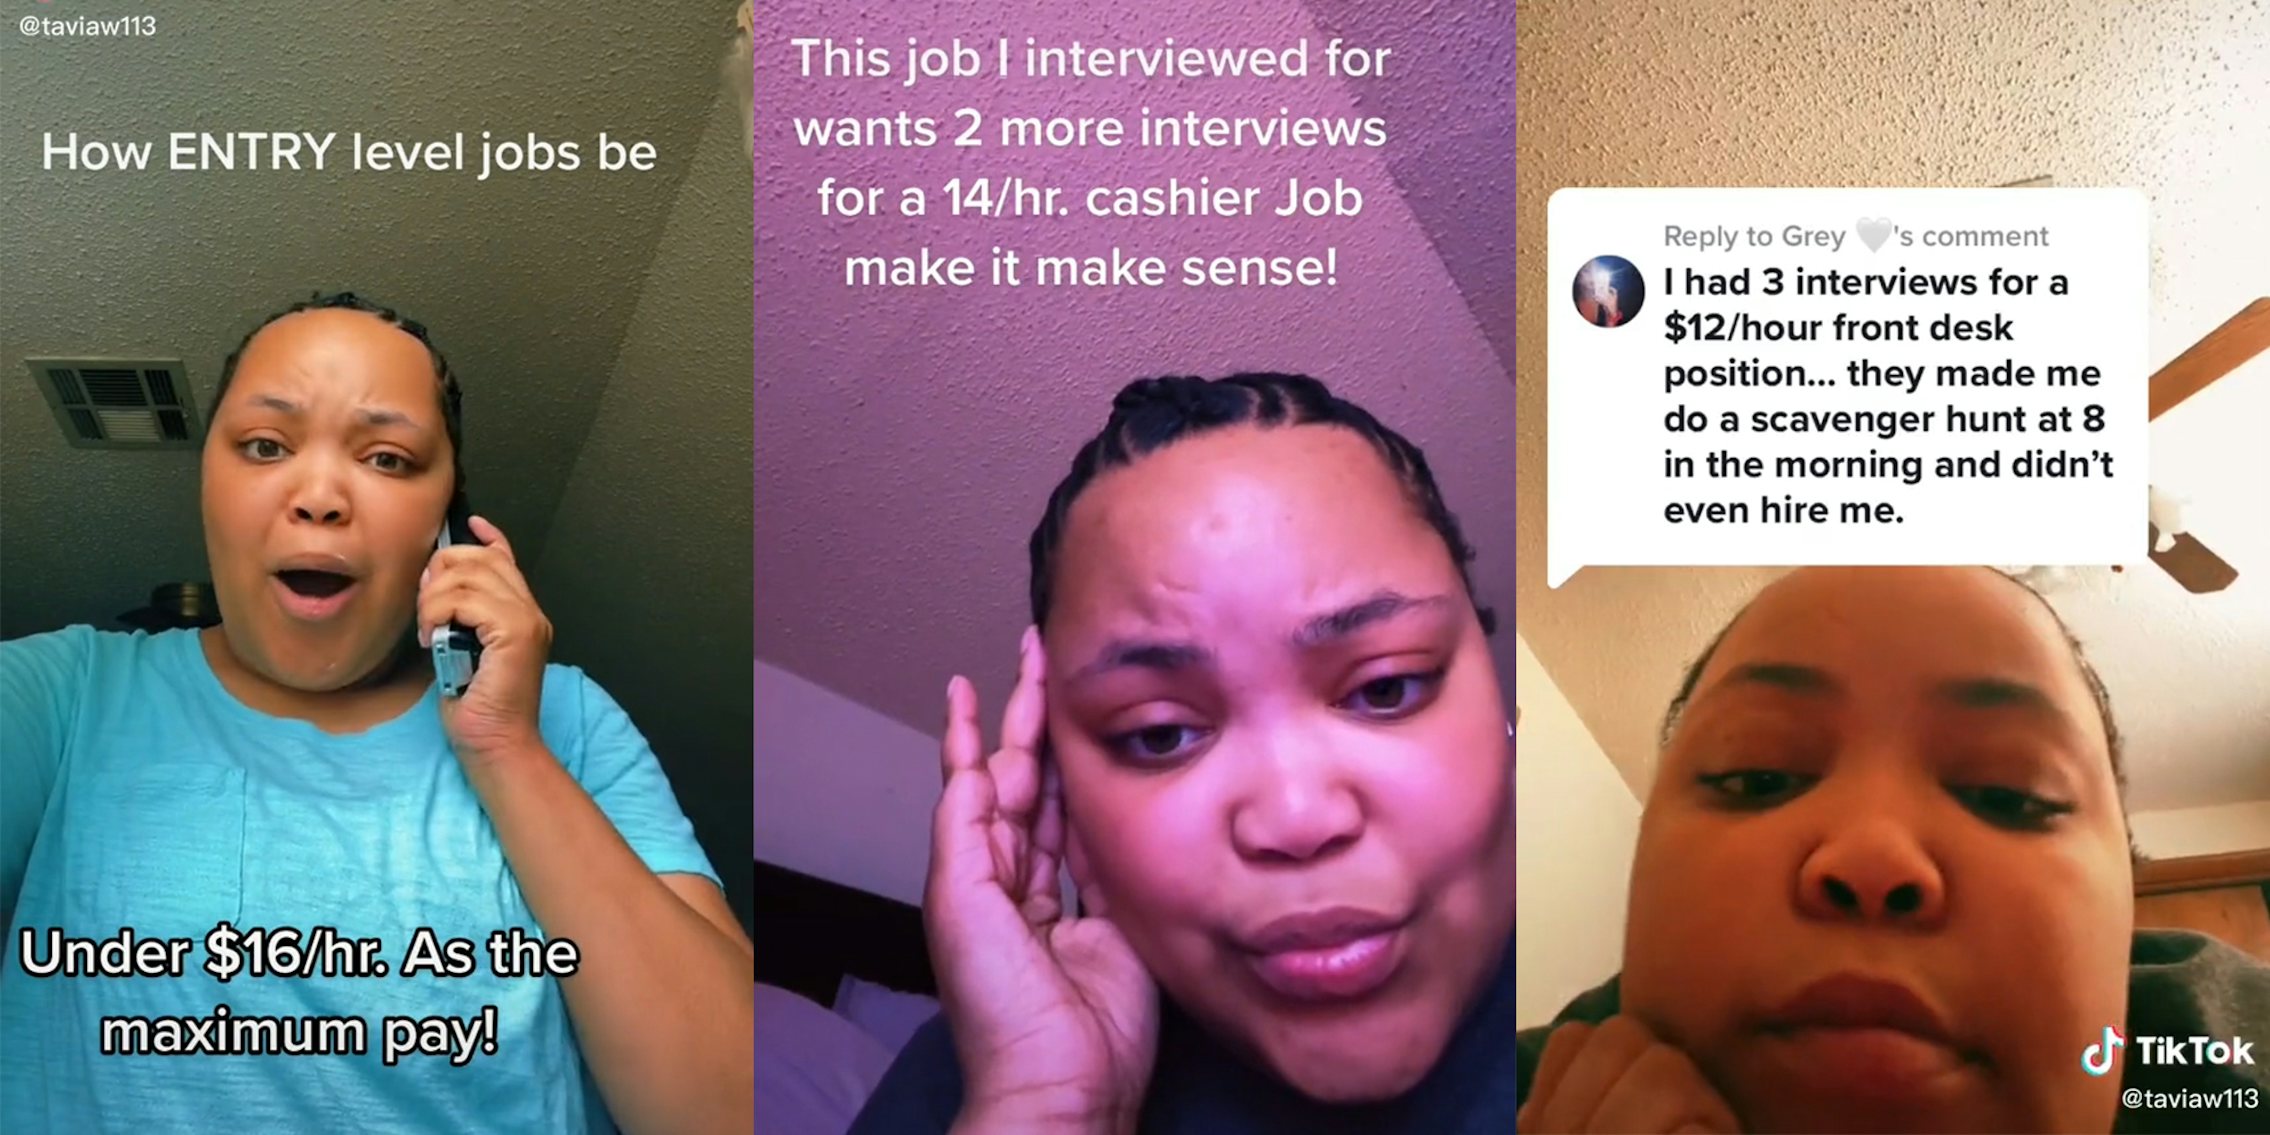 woman holding phone with caption 'How ENTRY level jobs be' and 'Under $16/hr. As the maximum pay!' (l) woman with caption 'This job I interviewd for wants 2 more interviews for a 14/hr. cashier Job make it make sense!' (c) woman with caption 'I had 3 interviews for a $12/hour front desk position... they made me do a scavenger hunt at 8 in the morning and didn't even hire me' (r)